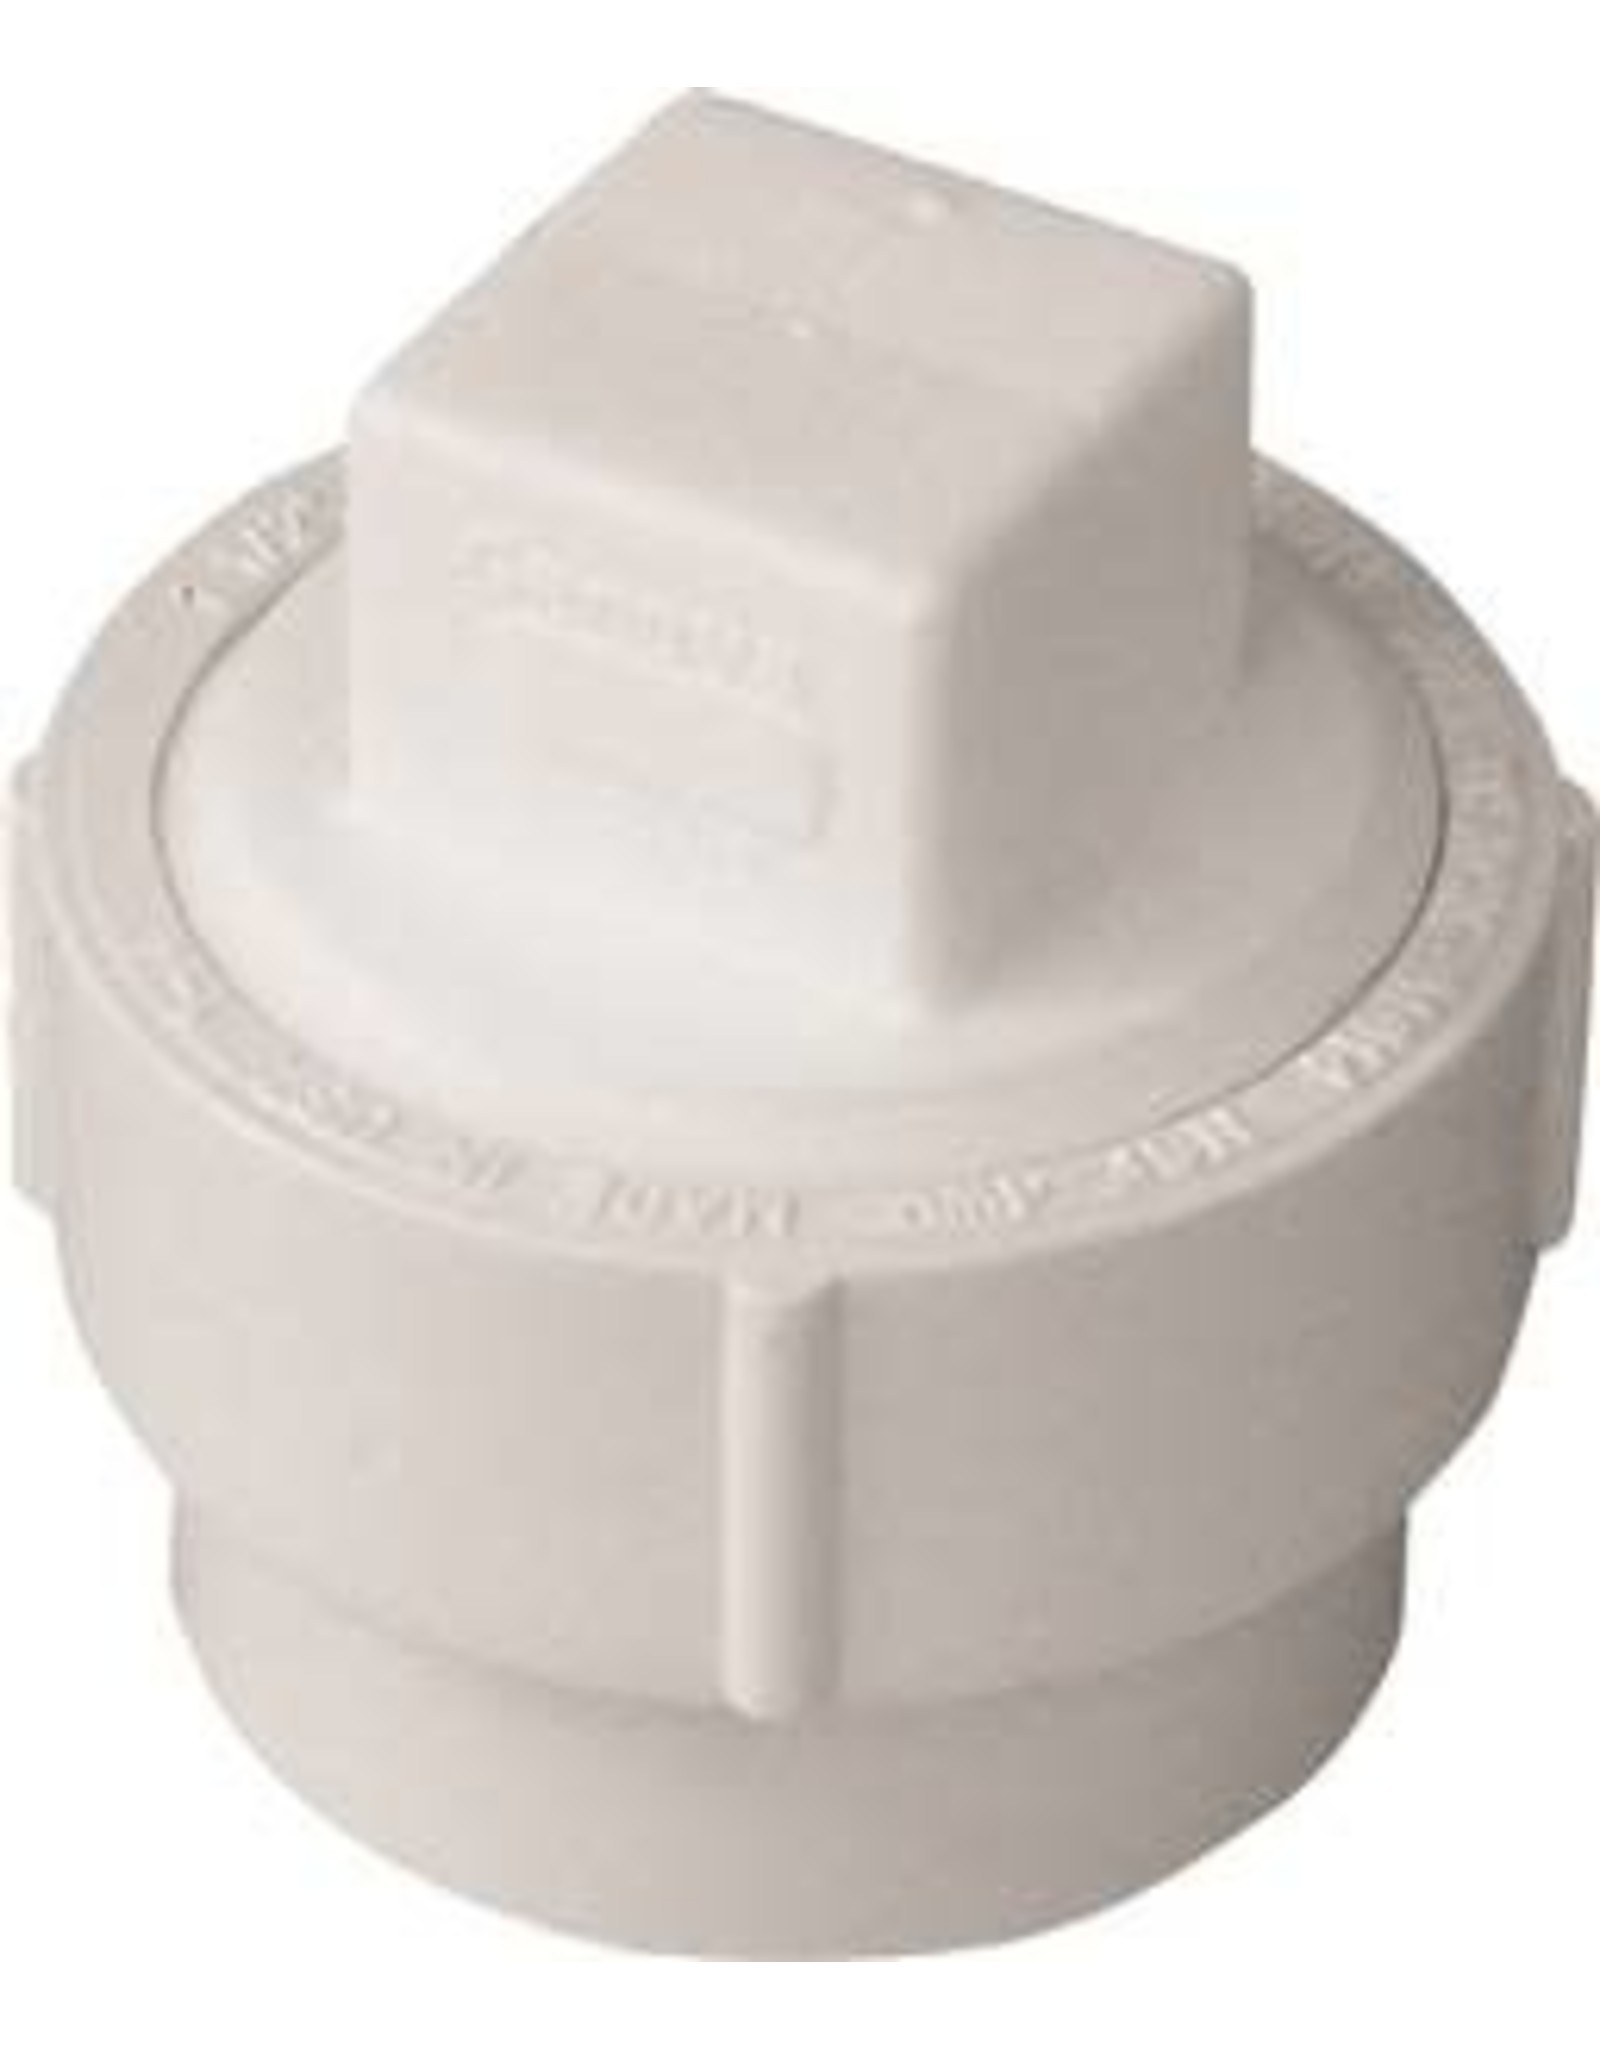 Ipex CANPLAS 193702AS Cleanout Body with Threaded Plug, 2 in, Spigot x FNPT, PVC, White